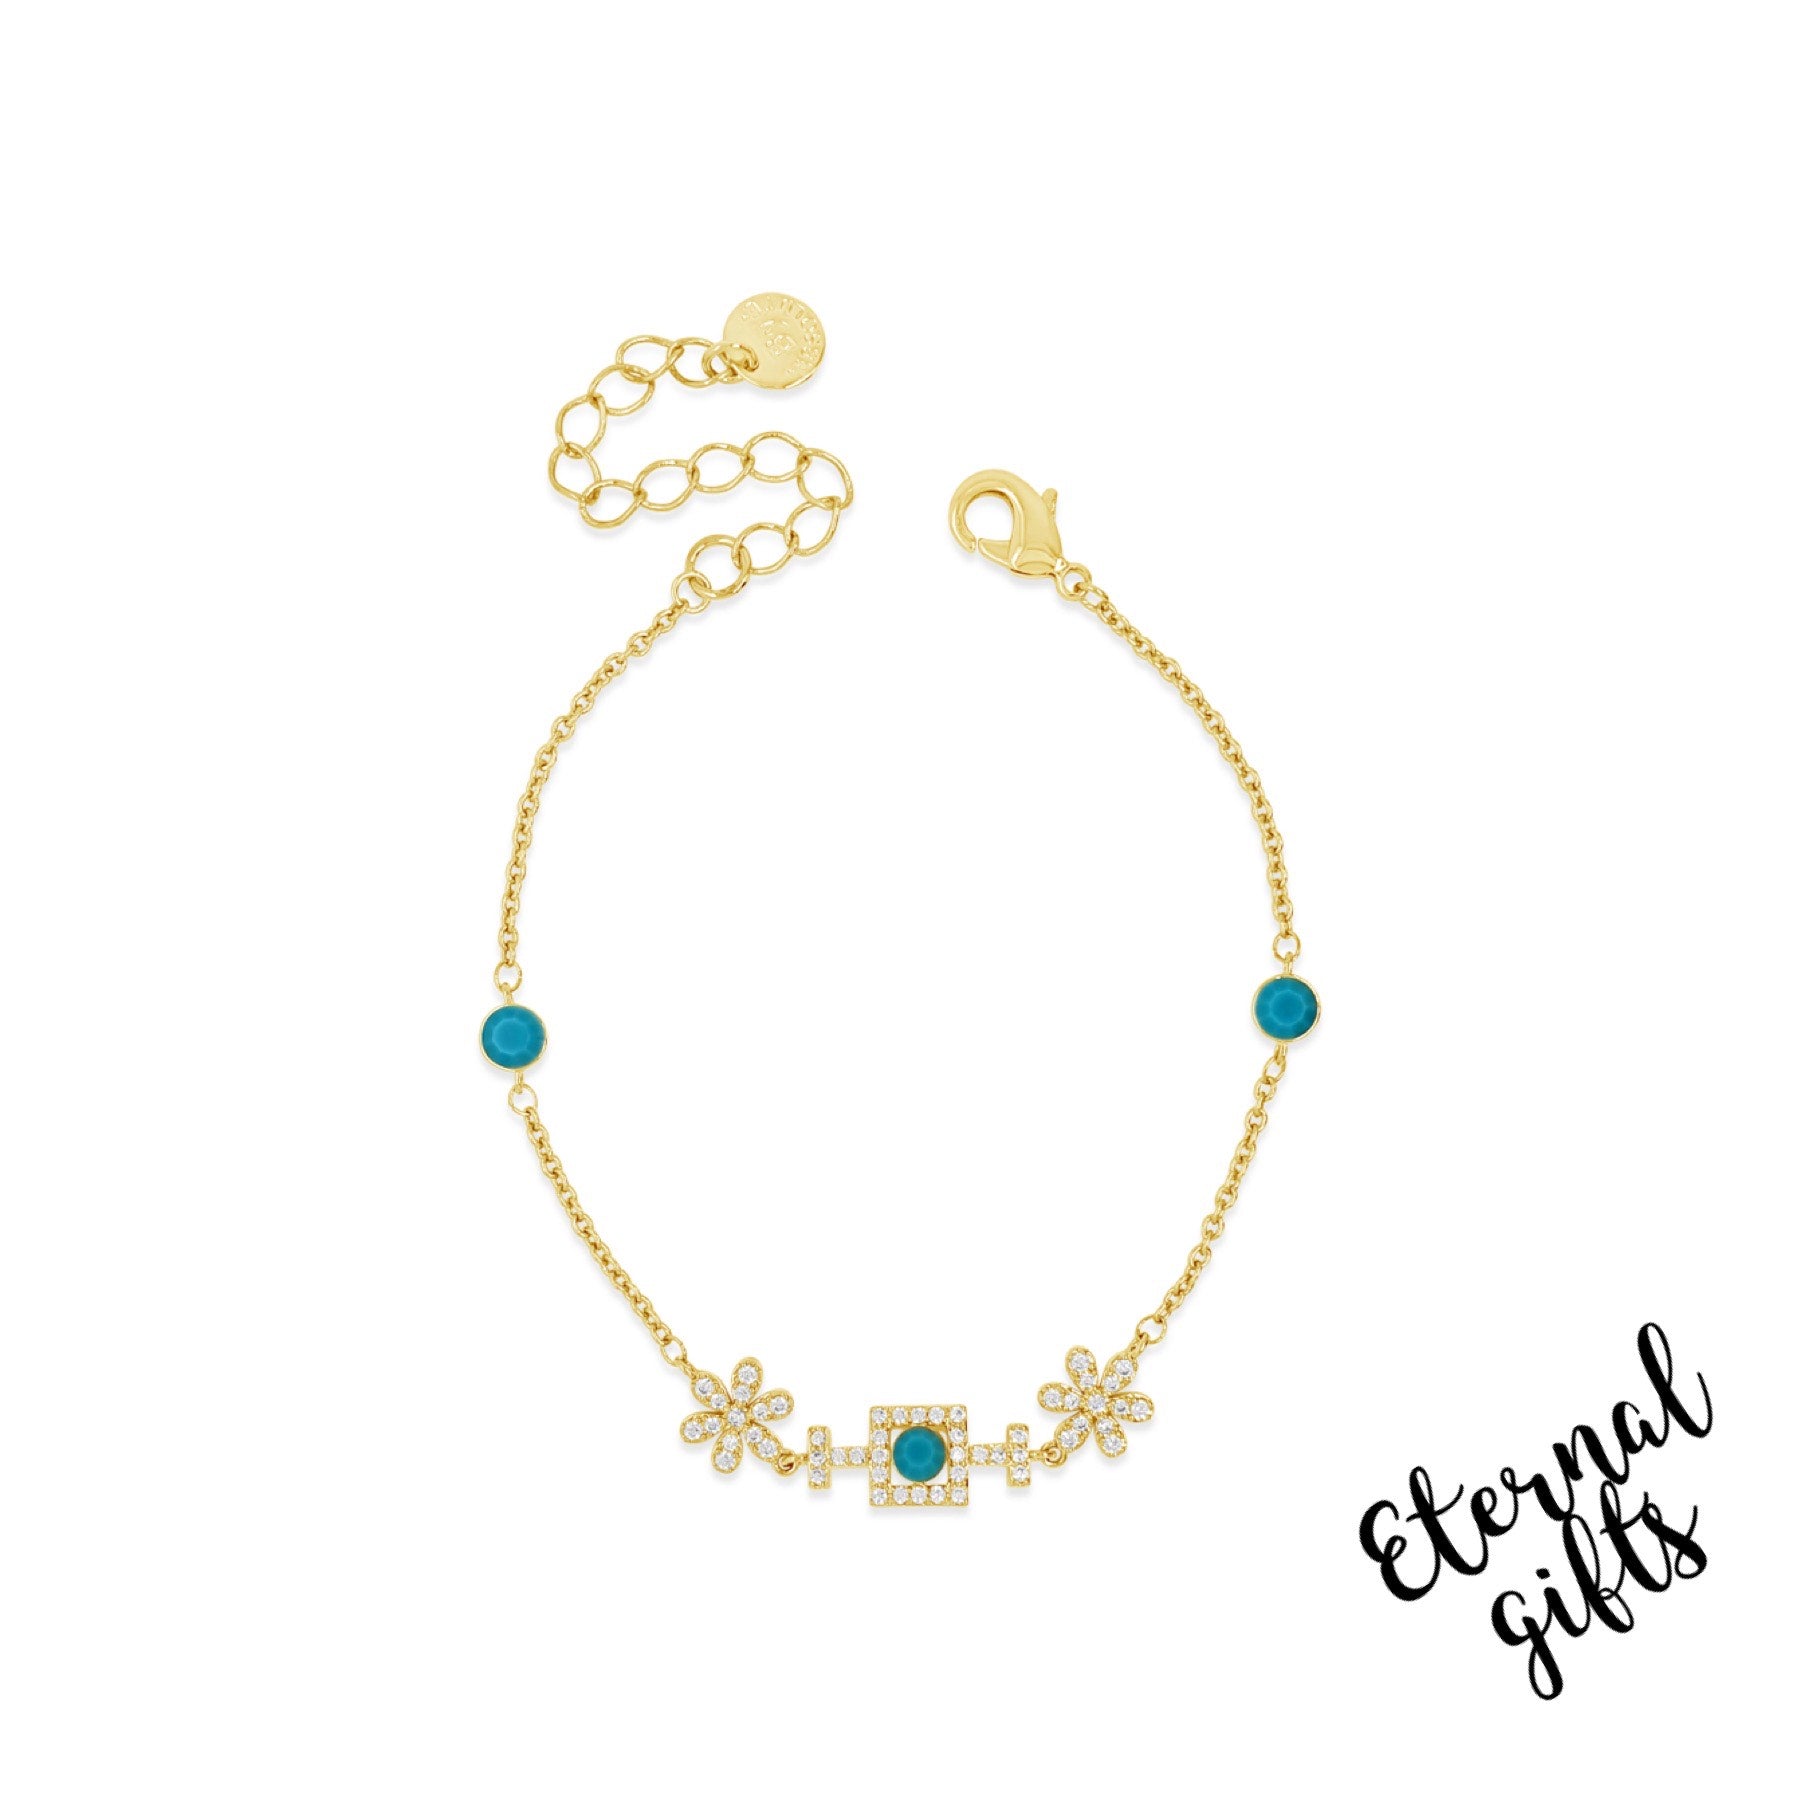 Daisy Bracelet in Turquoise & Gold by Absolute Jewellery B2198TQ